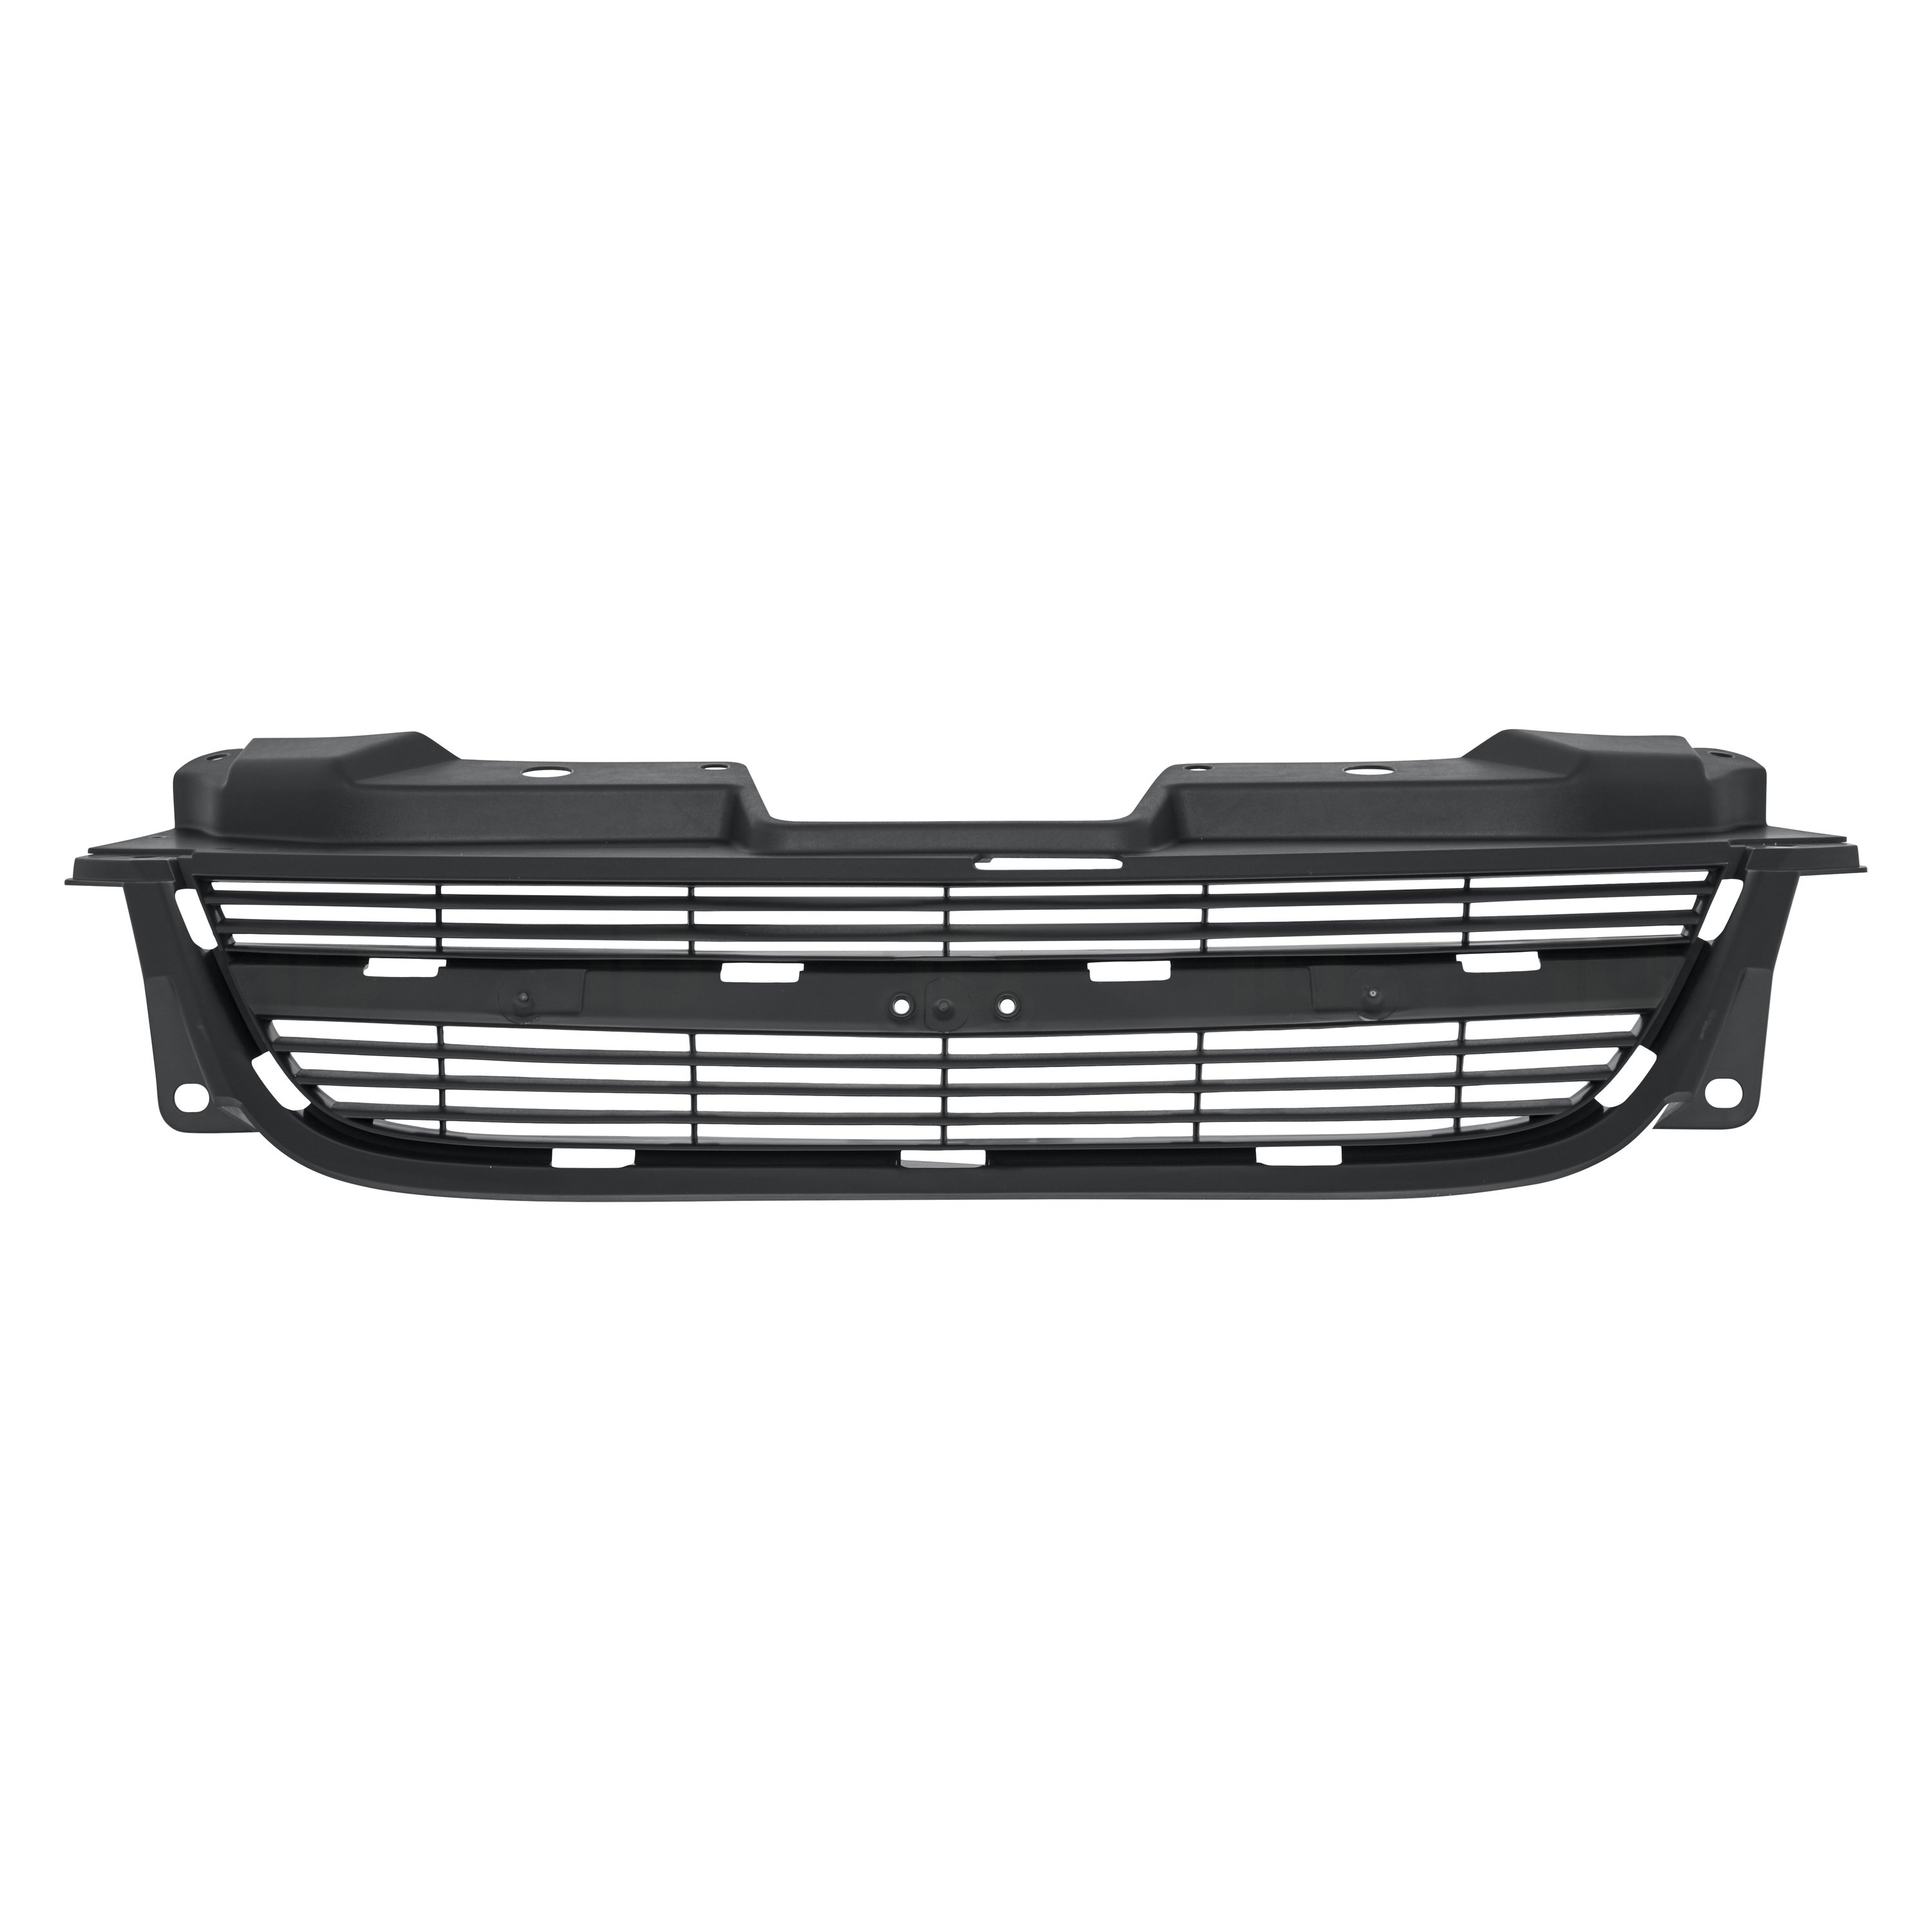 Replace® Gm1200545oe Upper Grille Brand New Oe